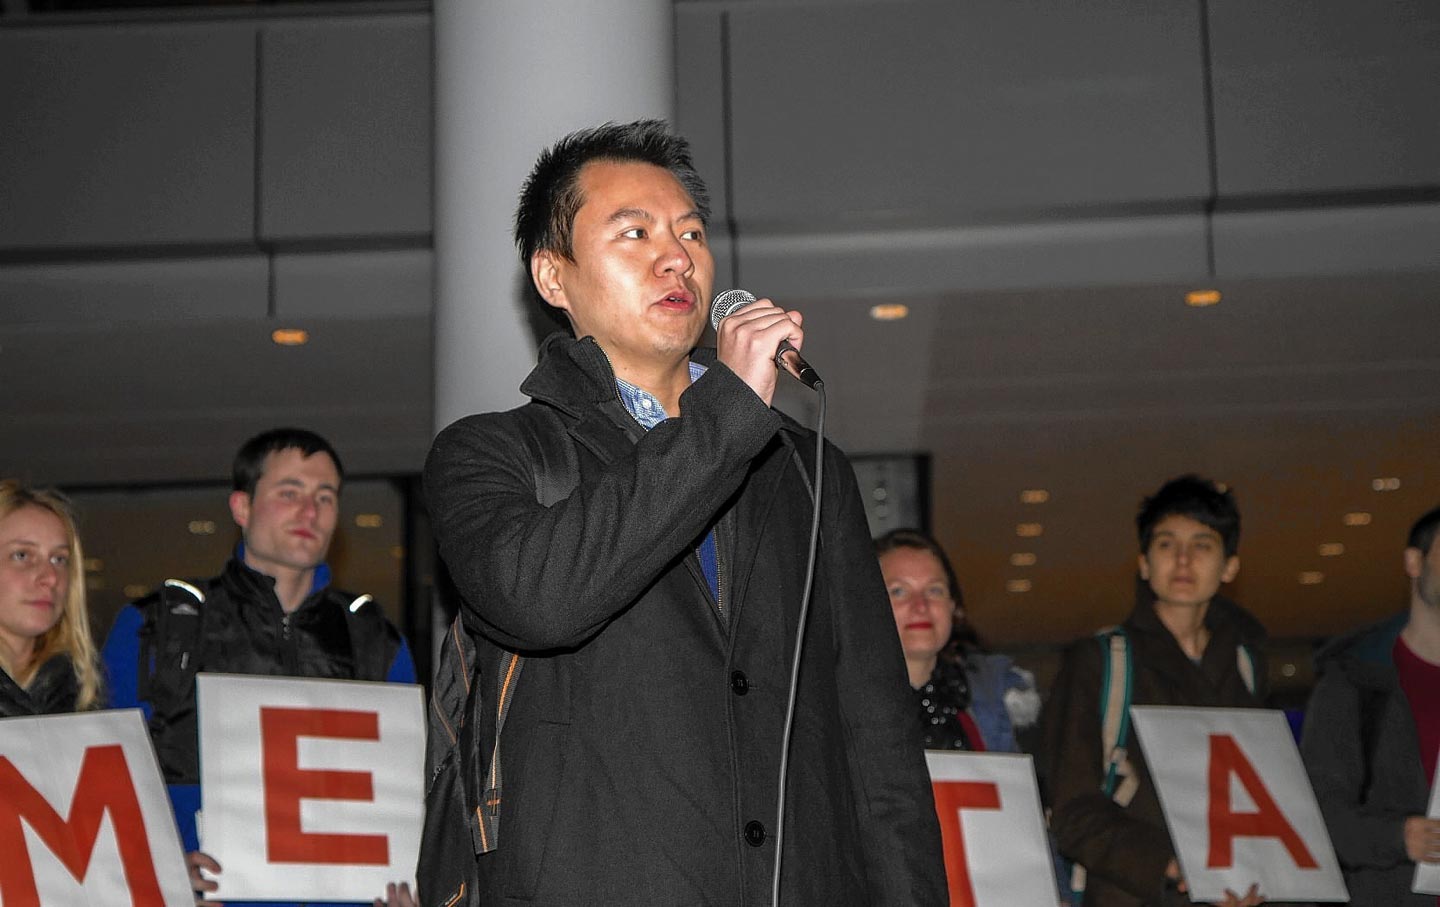 Graduate workers and supporters rally around Grant Mao at Yale University, December 8, 2015.